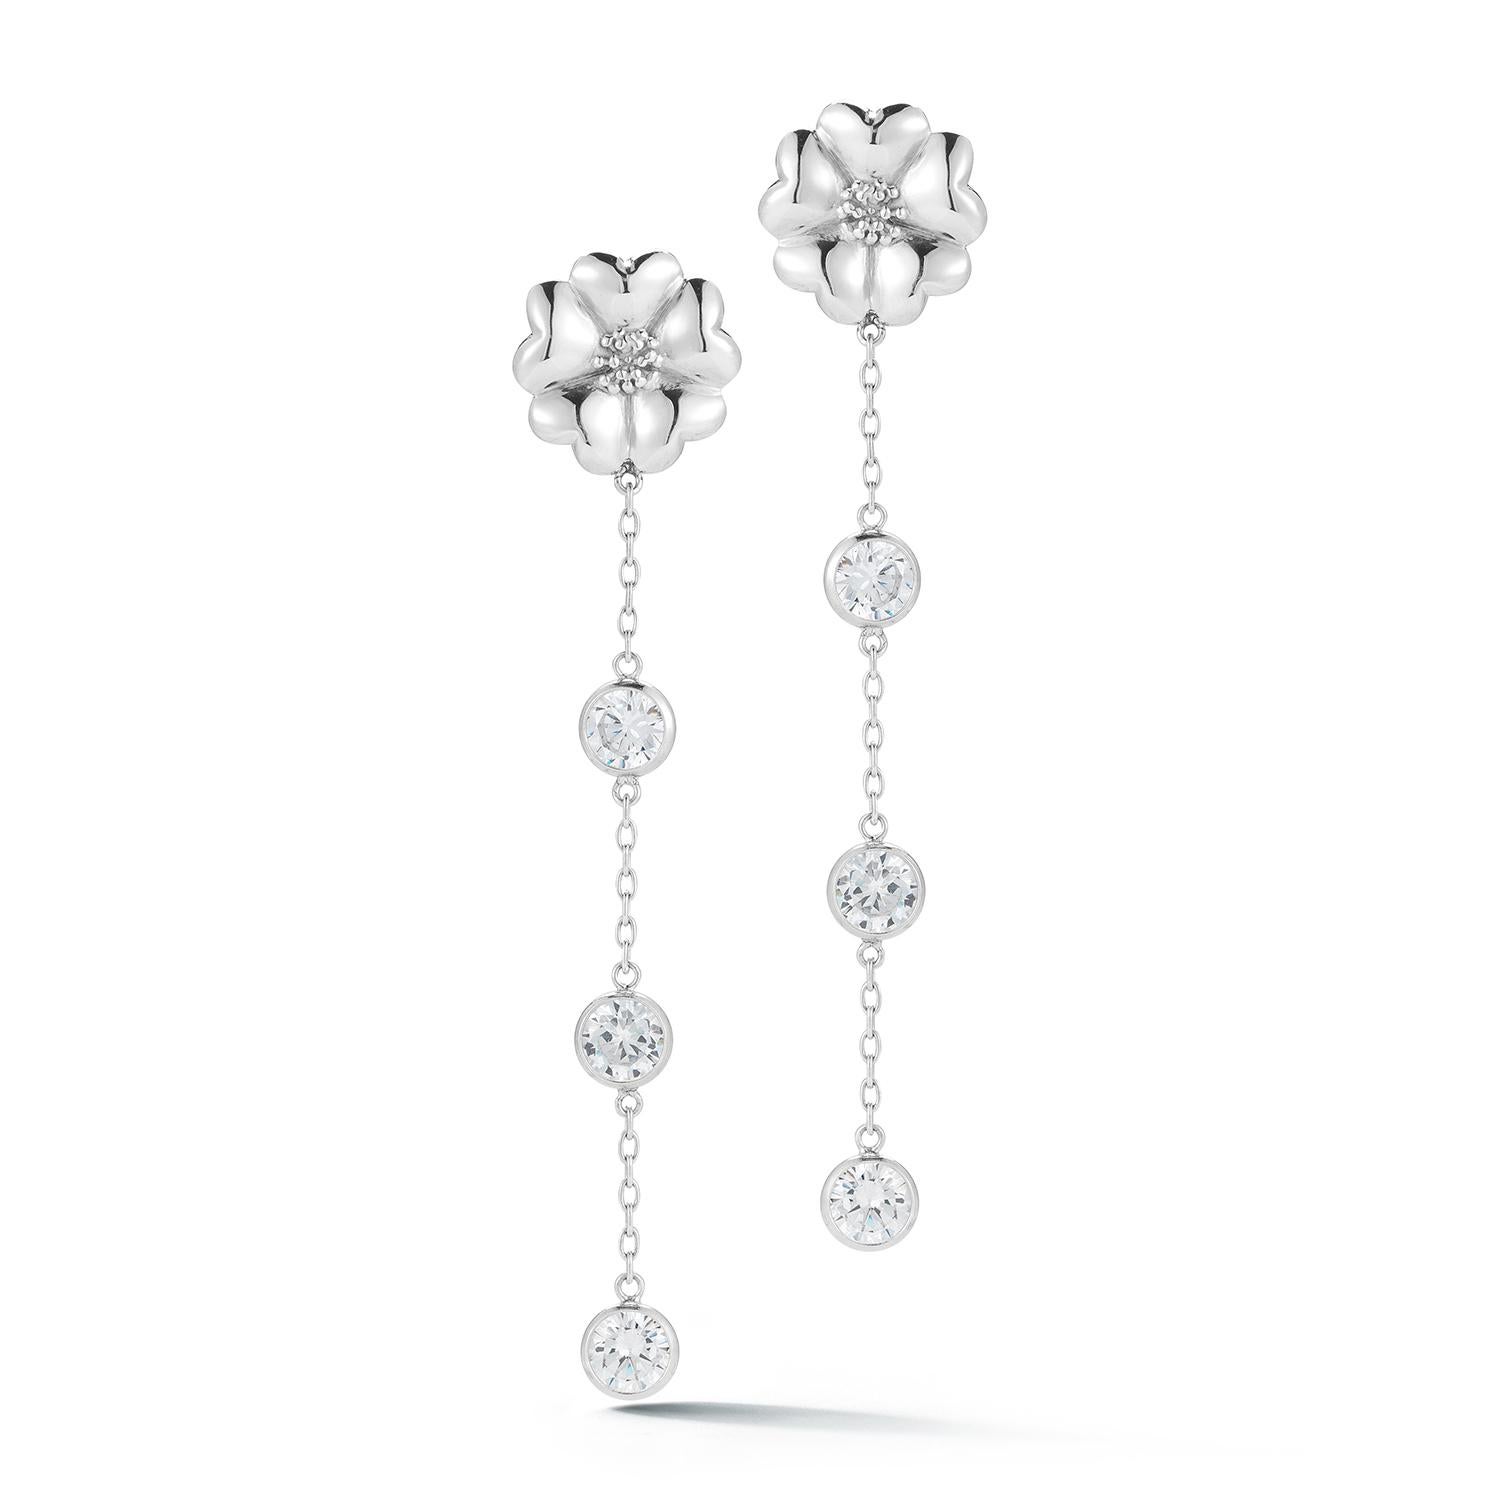 Designed in NYC

.925 Sterling Silver 6 x 6 mm Light Blue Topaz Triple Stone Drop Blossom Earrings. No matter the season, allow natural beauty to surround you wherever you go. Triple stone drop blossom earrings: 

Sterling silver 
High-polish